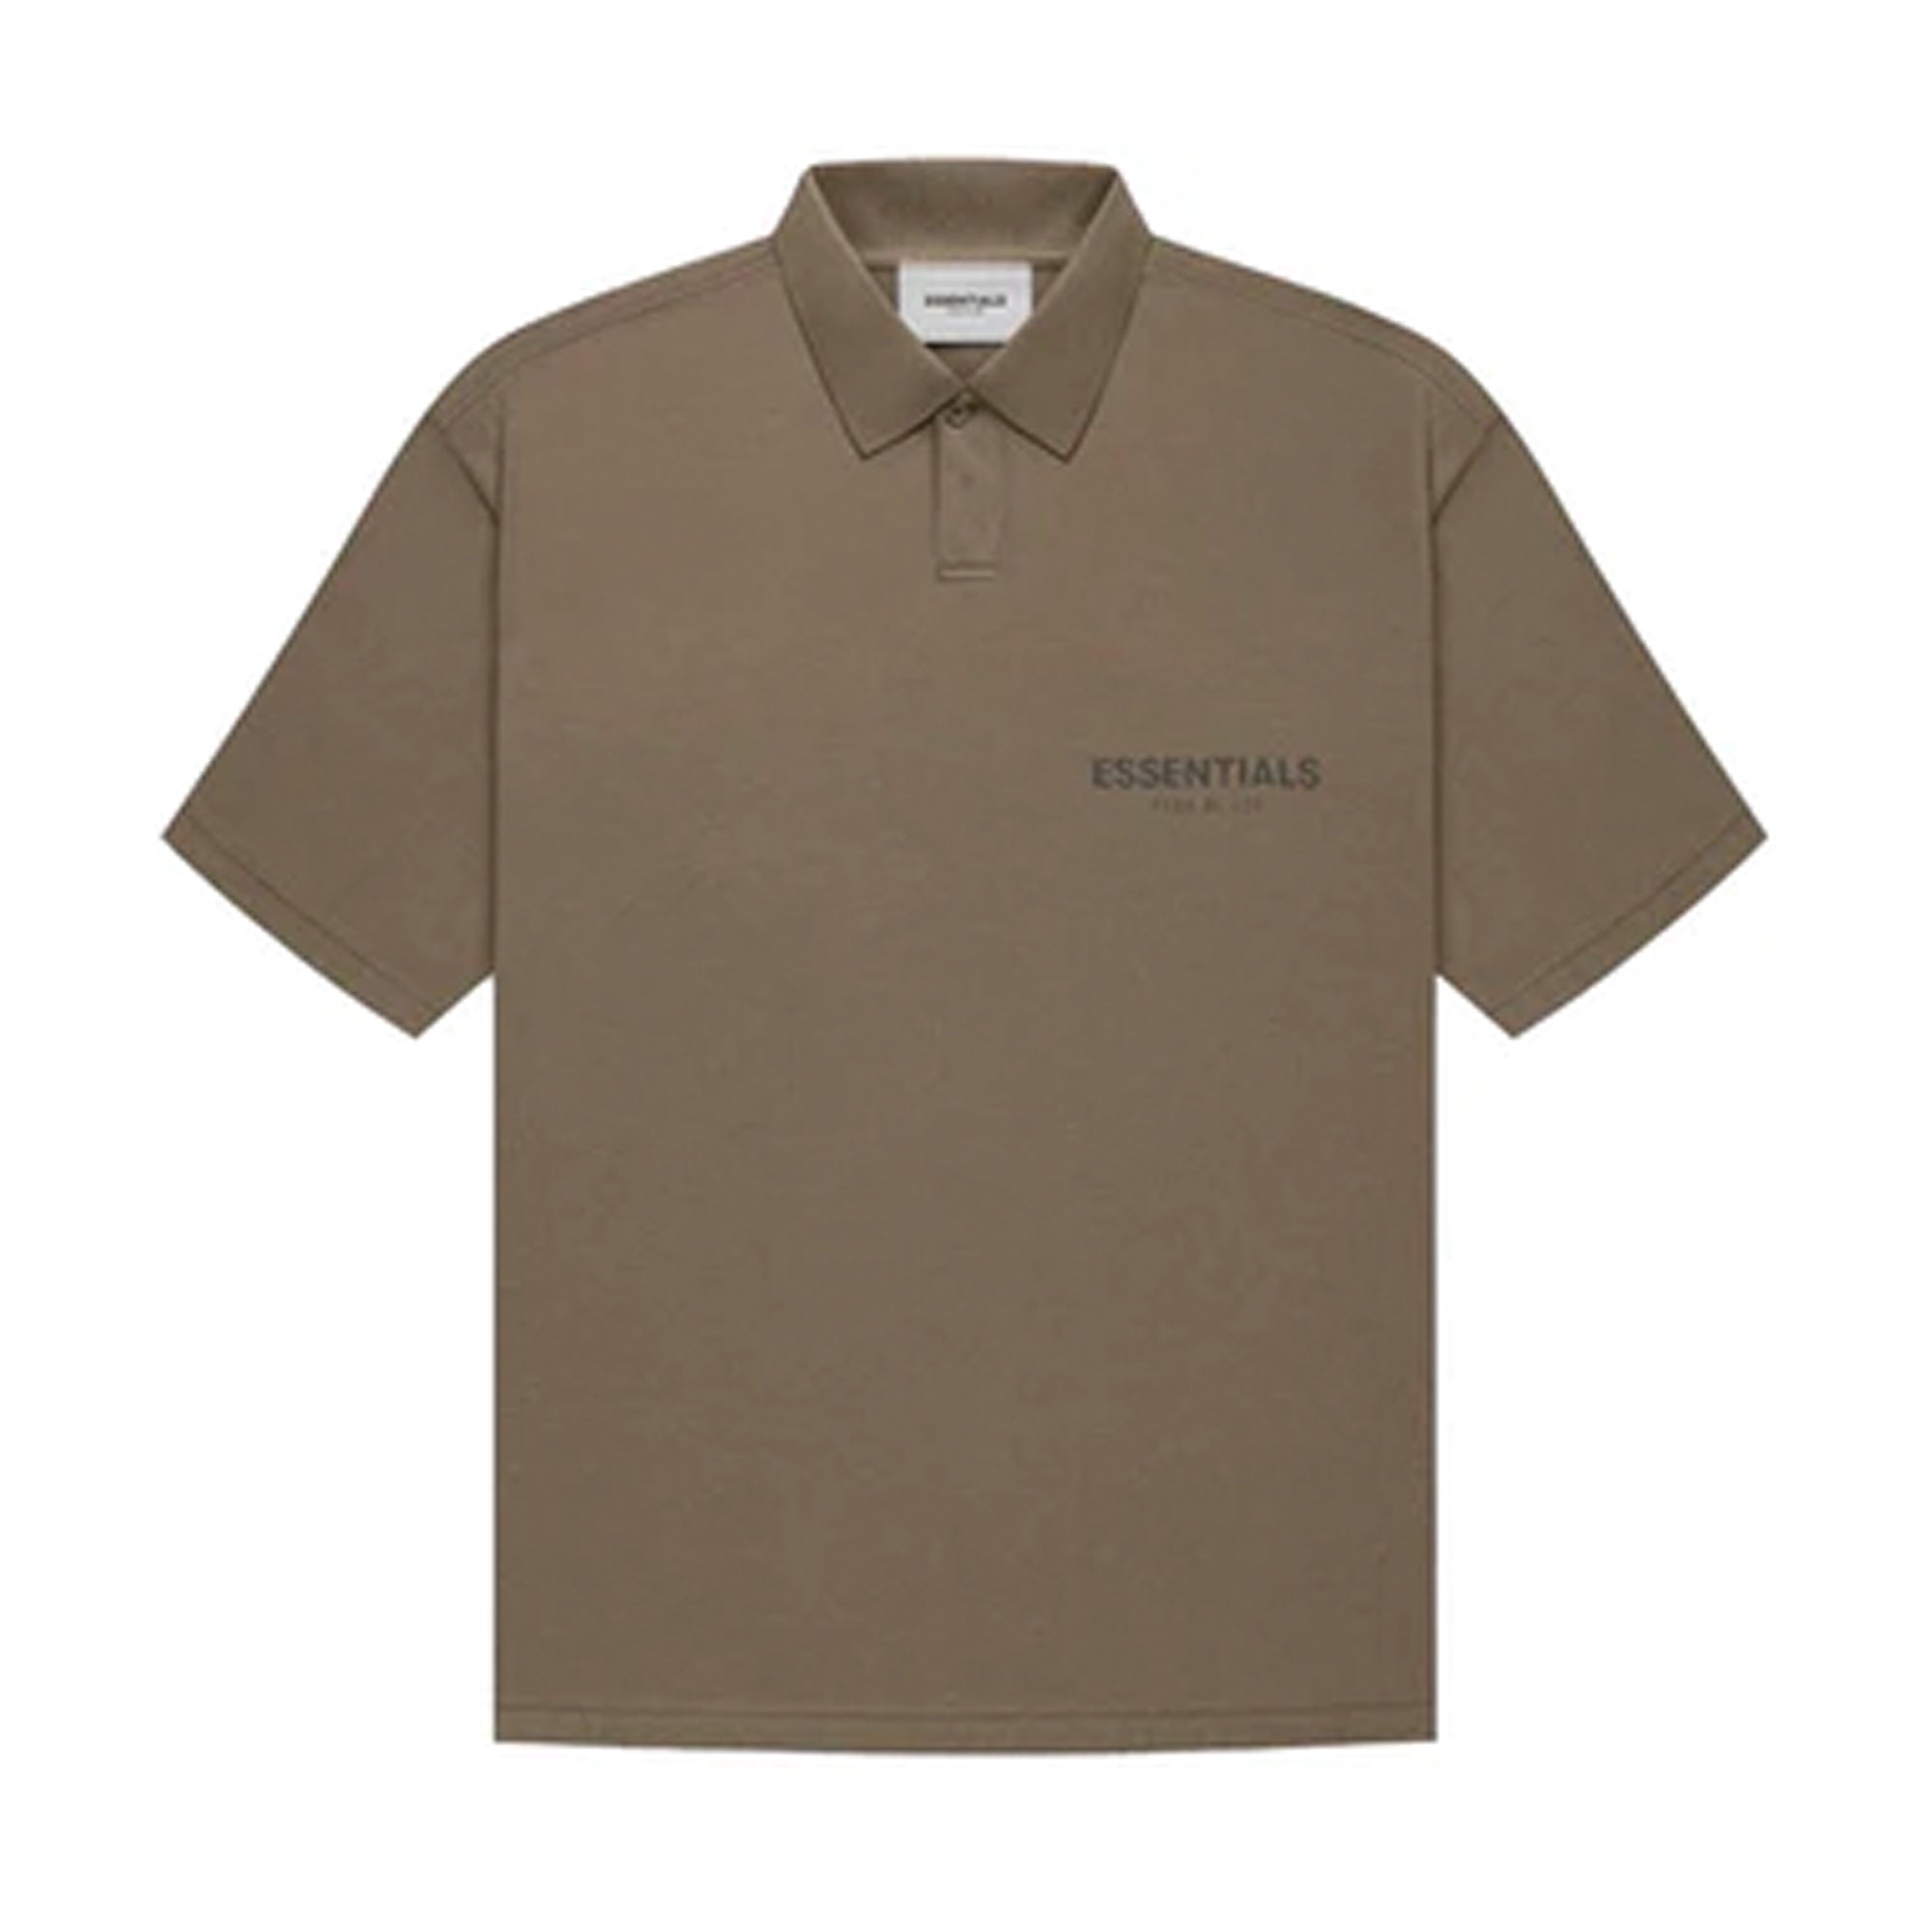 Fear of God Essentials S/S Polo Tee Harvest-PLUS